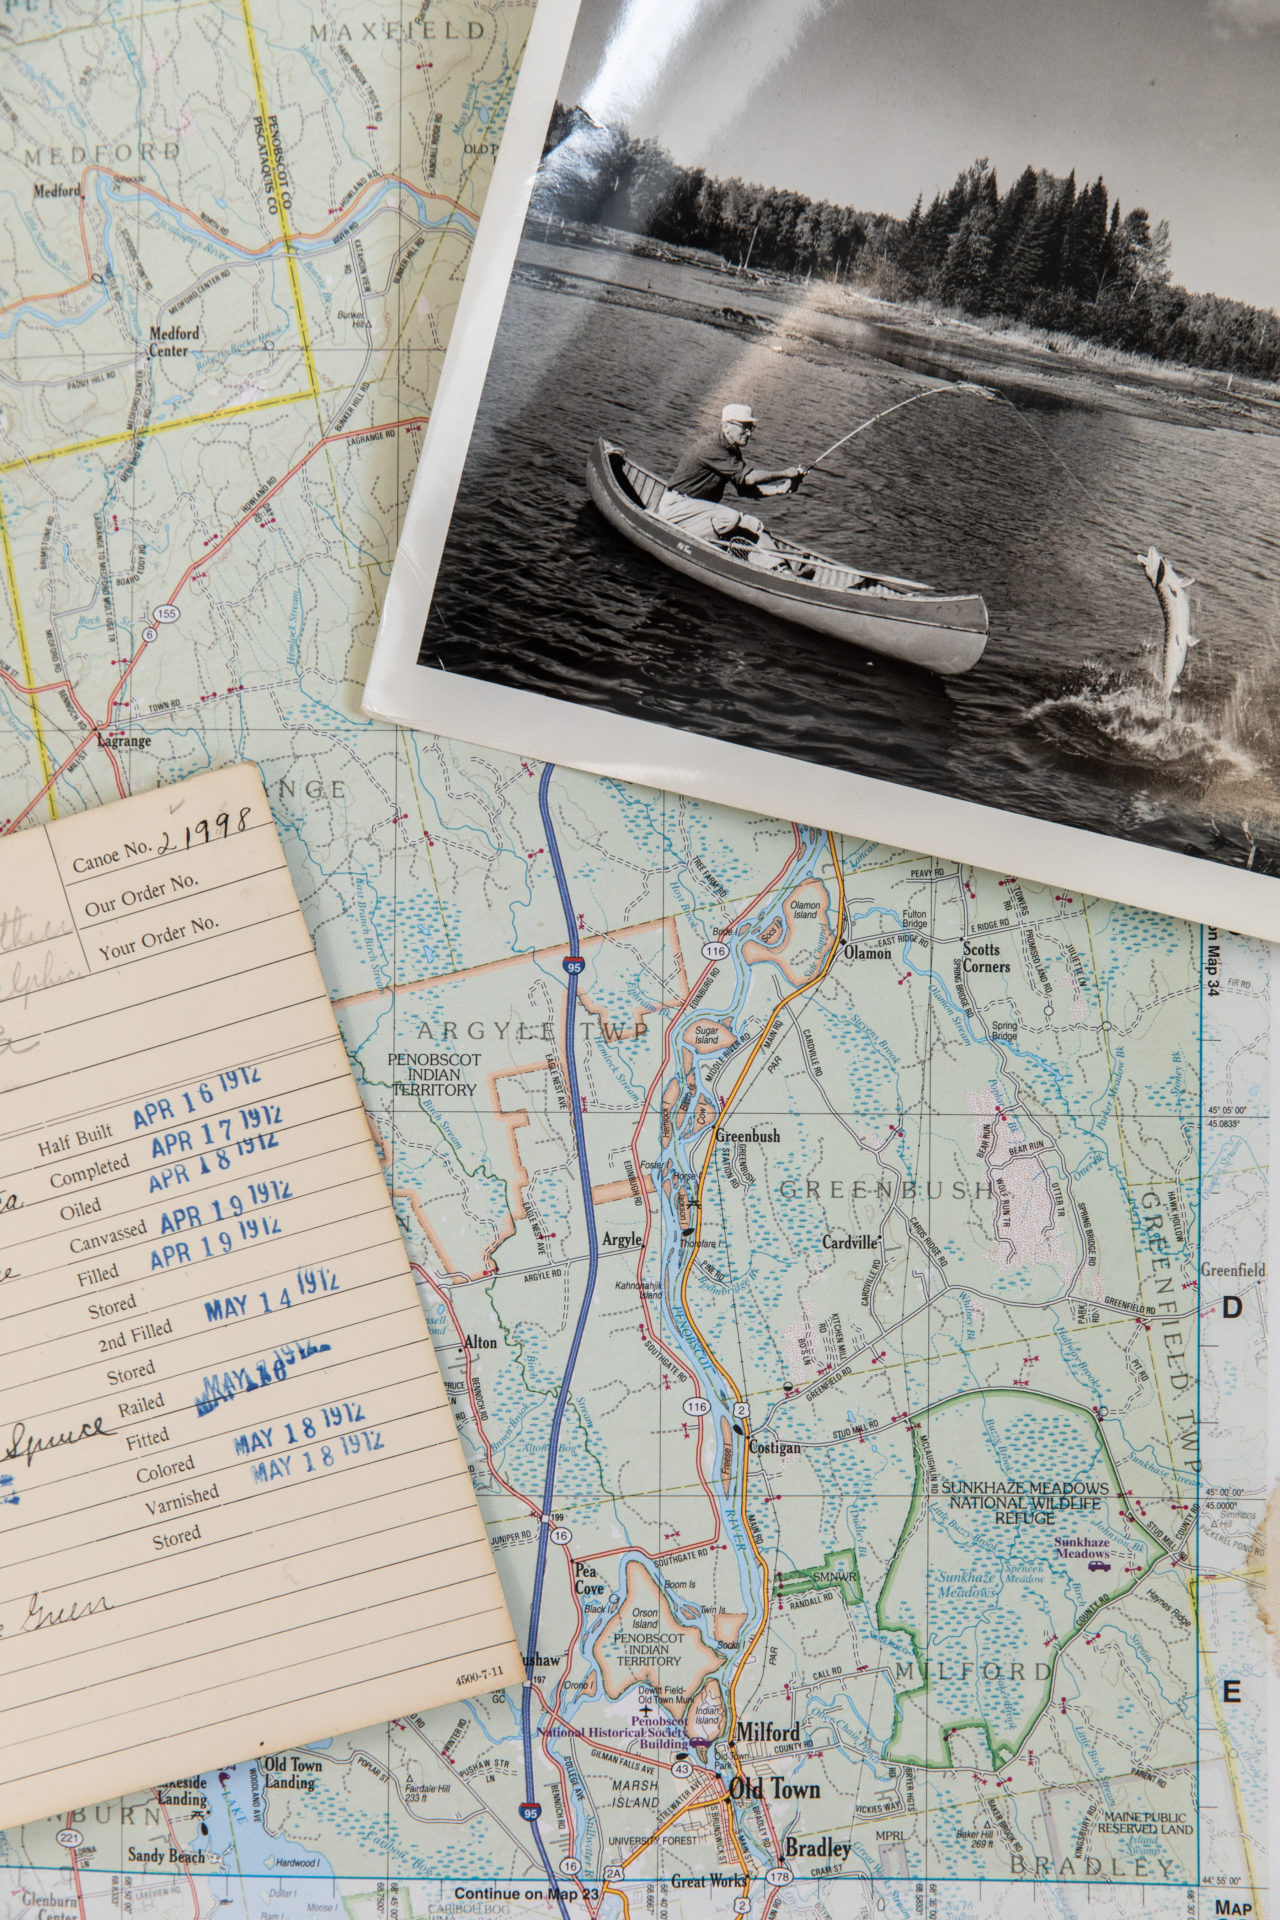 A map, notebook and black and white photograph of a man fishing.